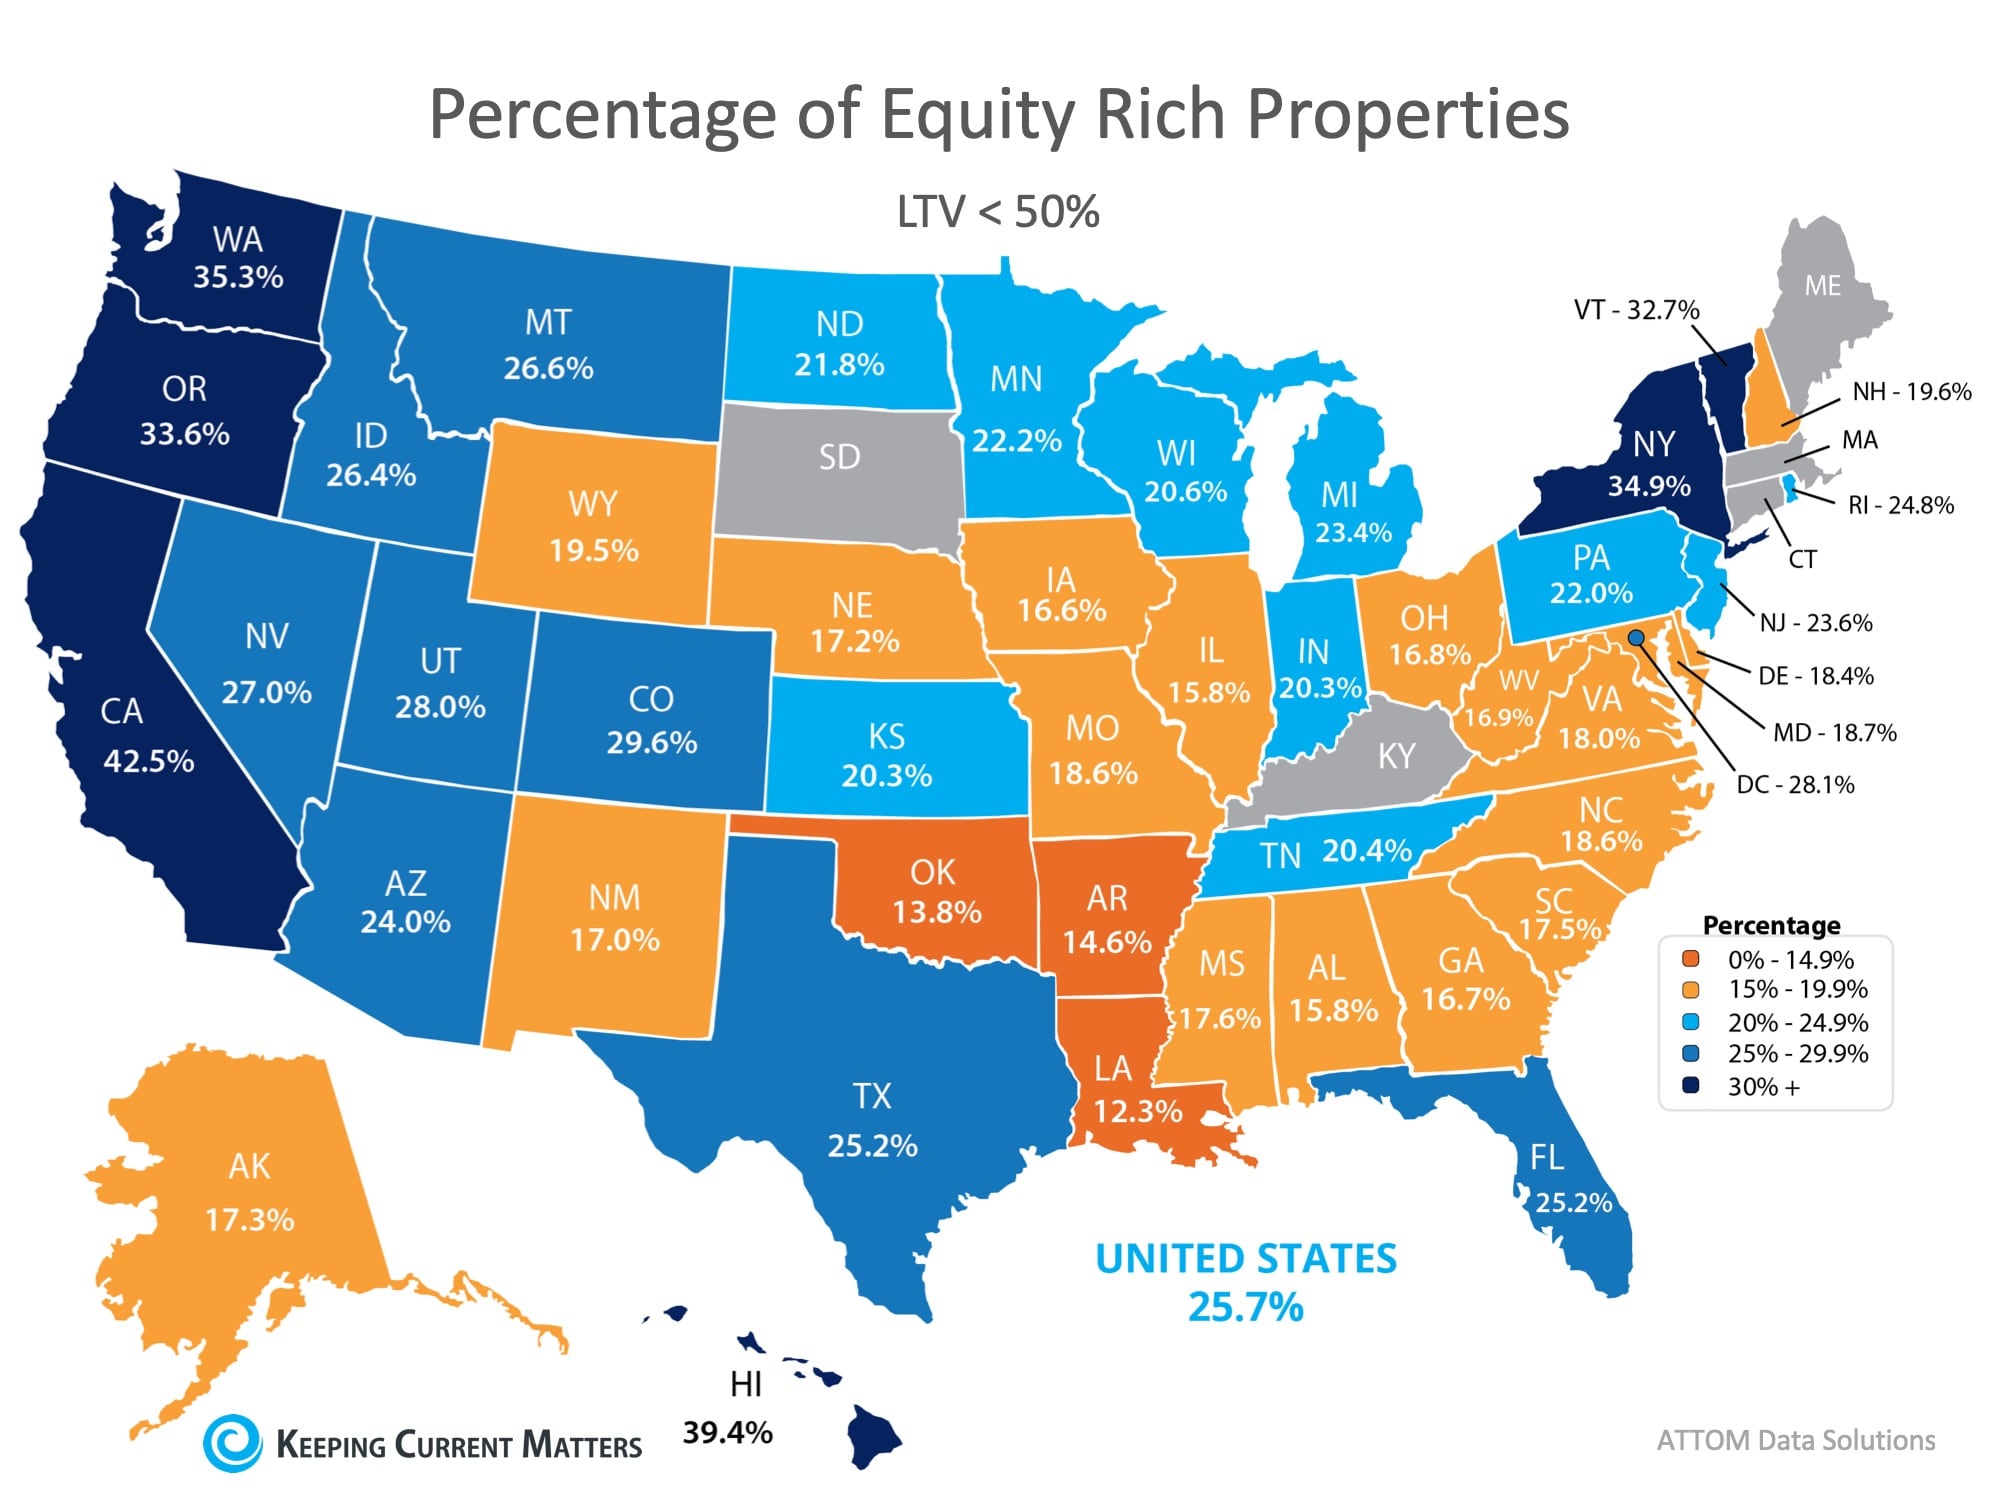 Percentage of Equity Rich Properties